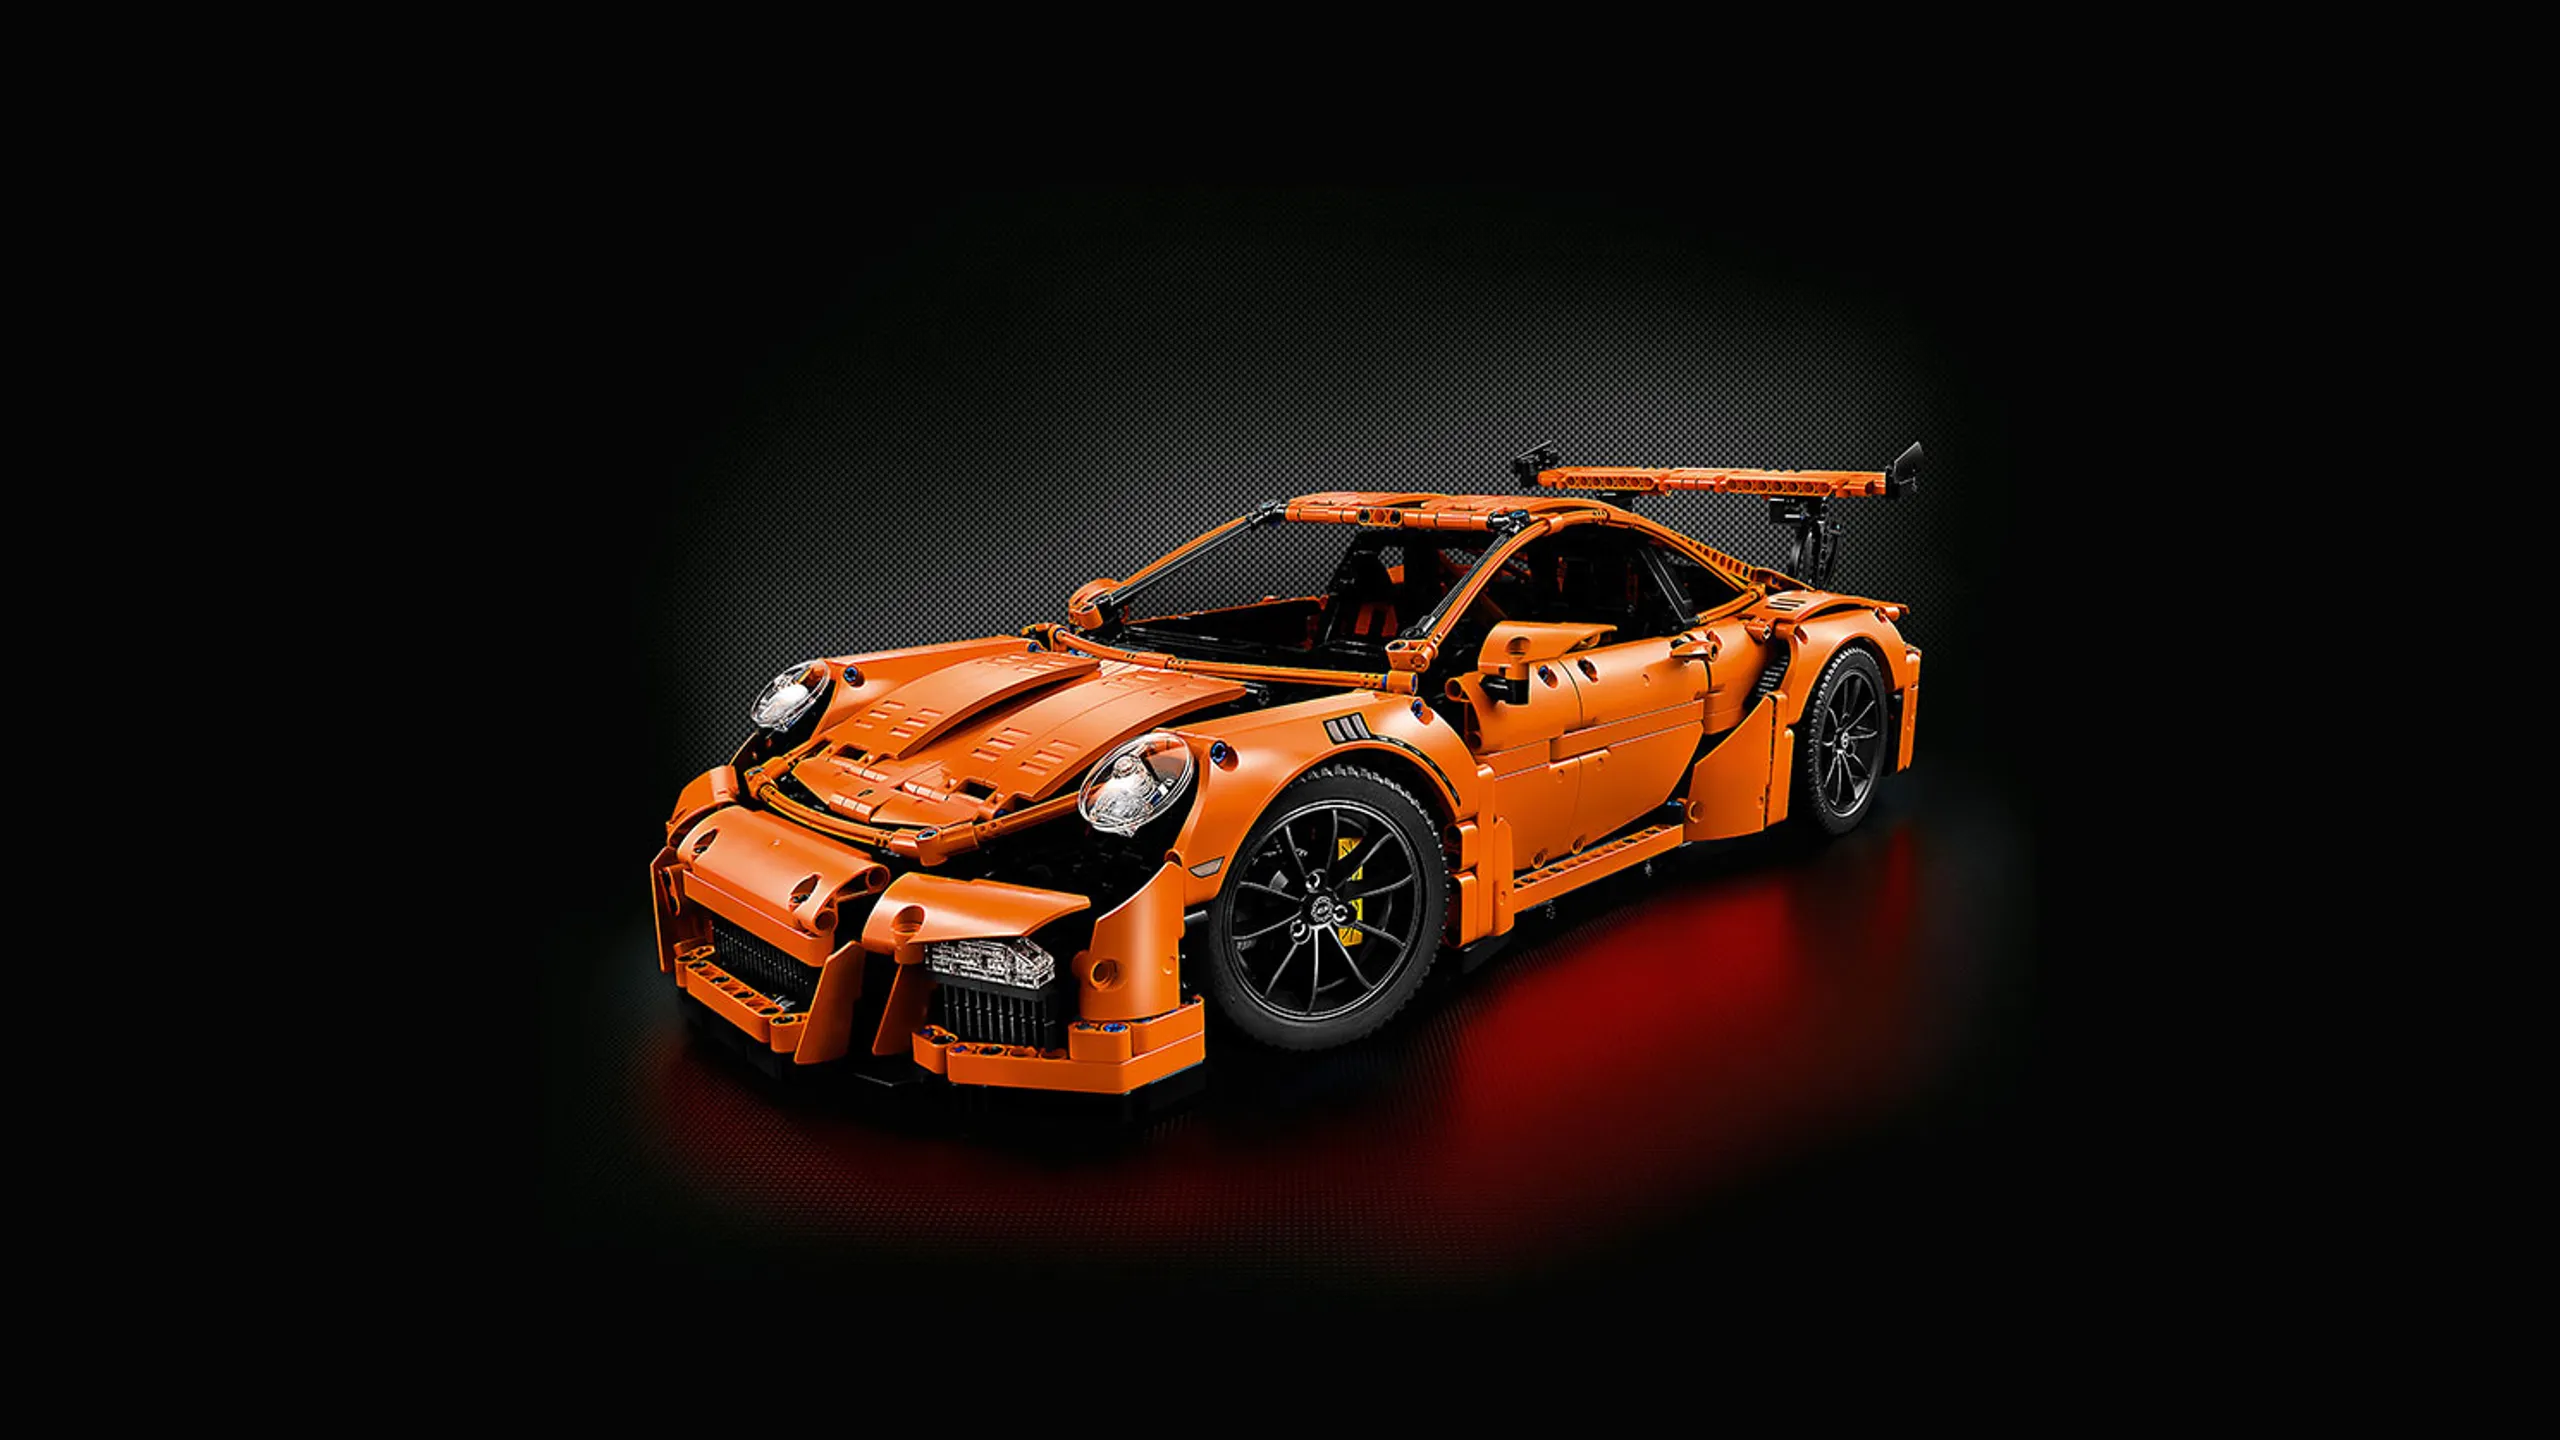 LEGO Technic - 42056 Porsche 911 GT3 RS - This streamlined orange LEGO Technic Porsche is packed with authentic features and functions that capture the magic of the iconic supercar.